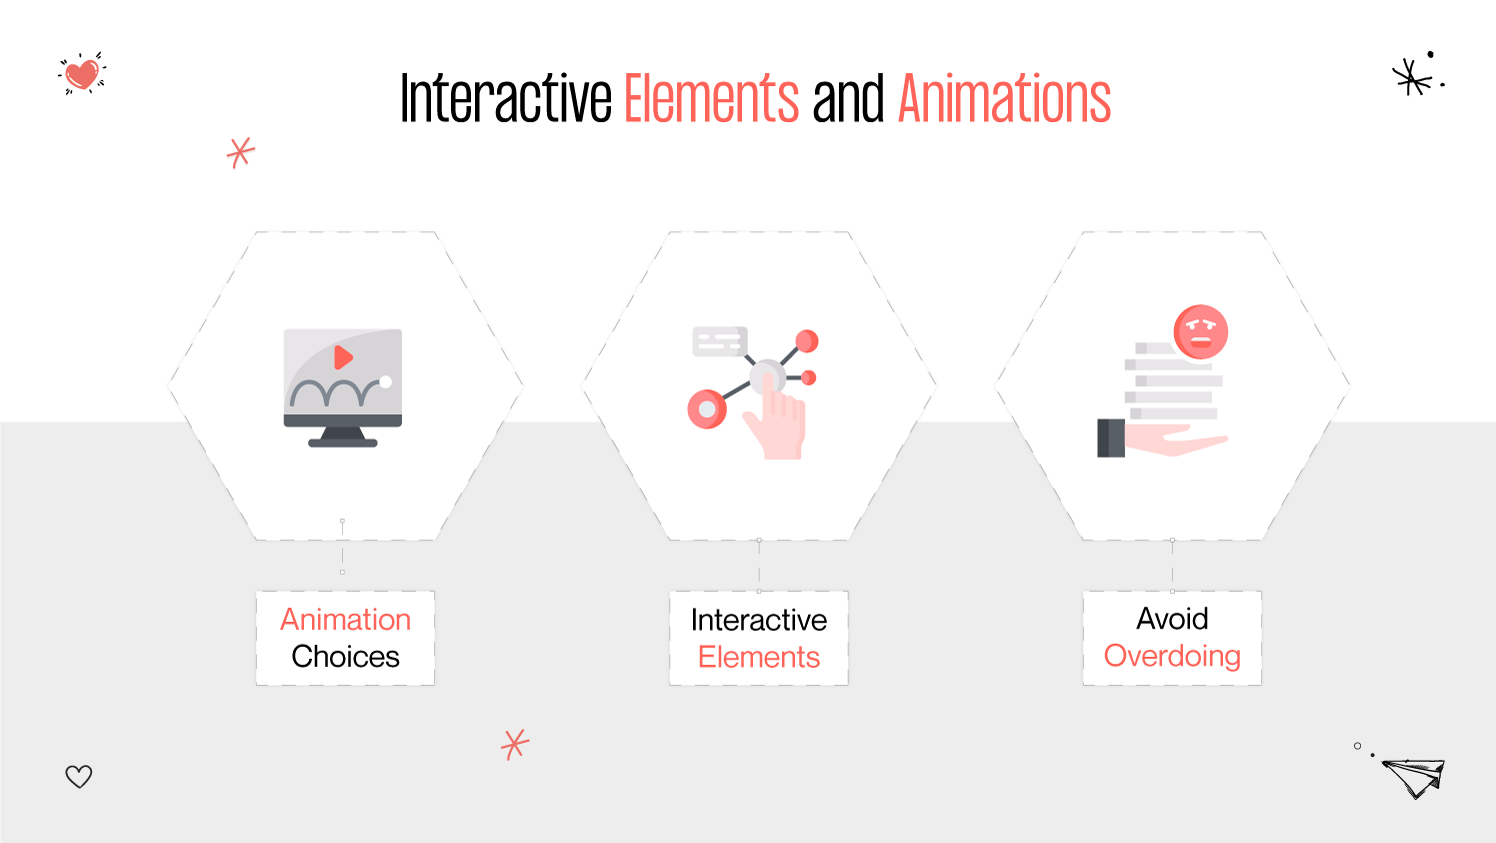 Interactive elements and animation